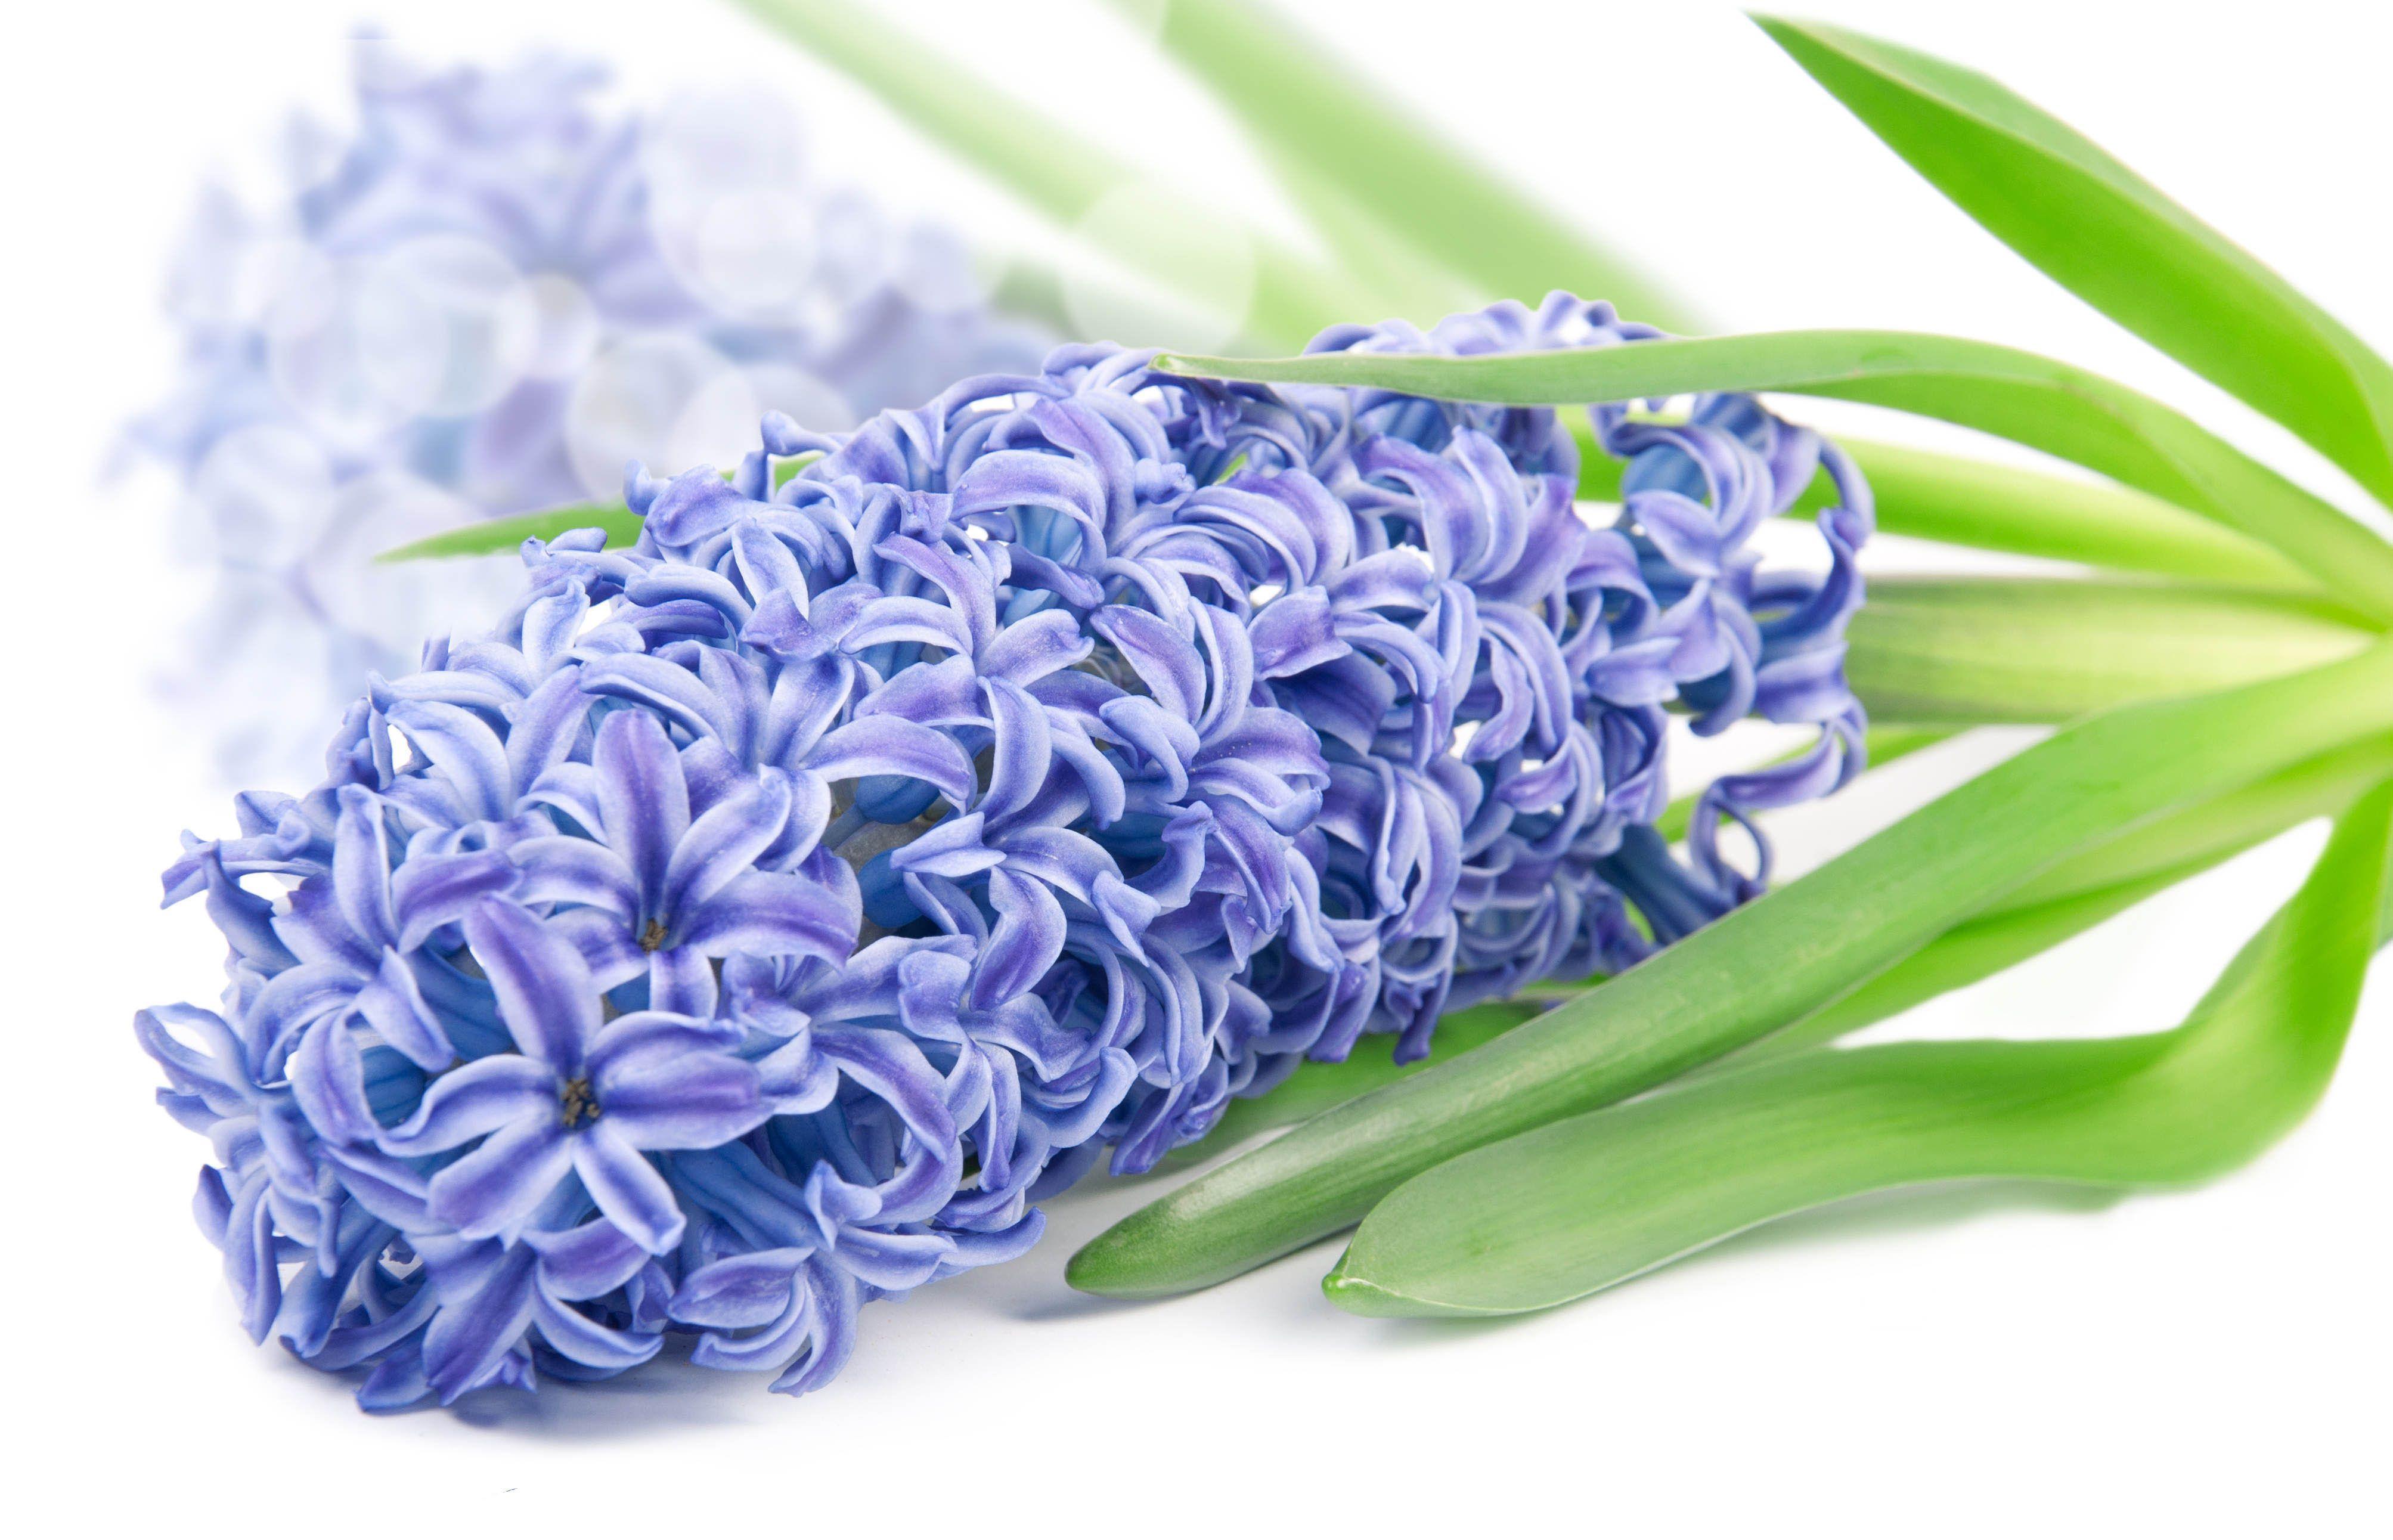 Delicate flower hyacinth wallpaper and image